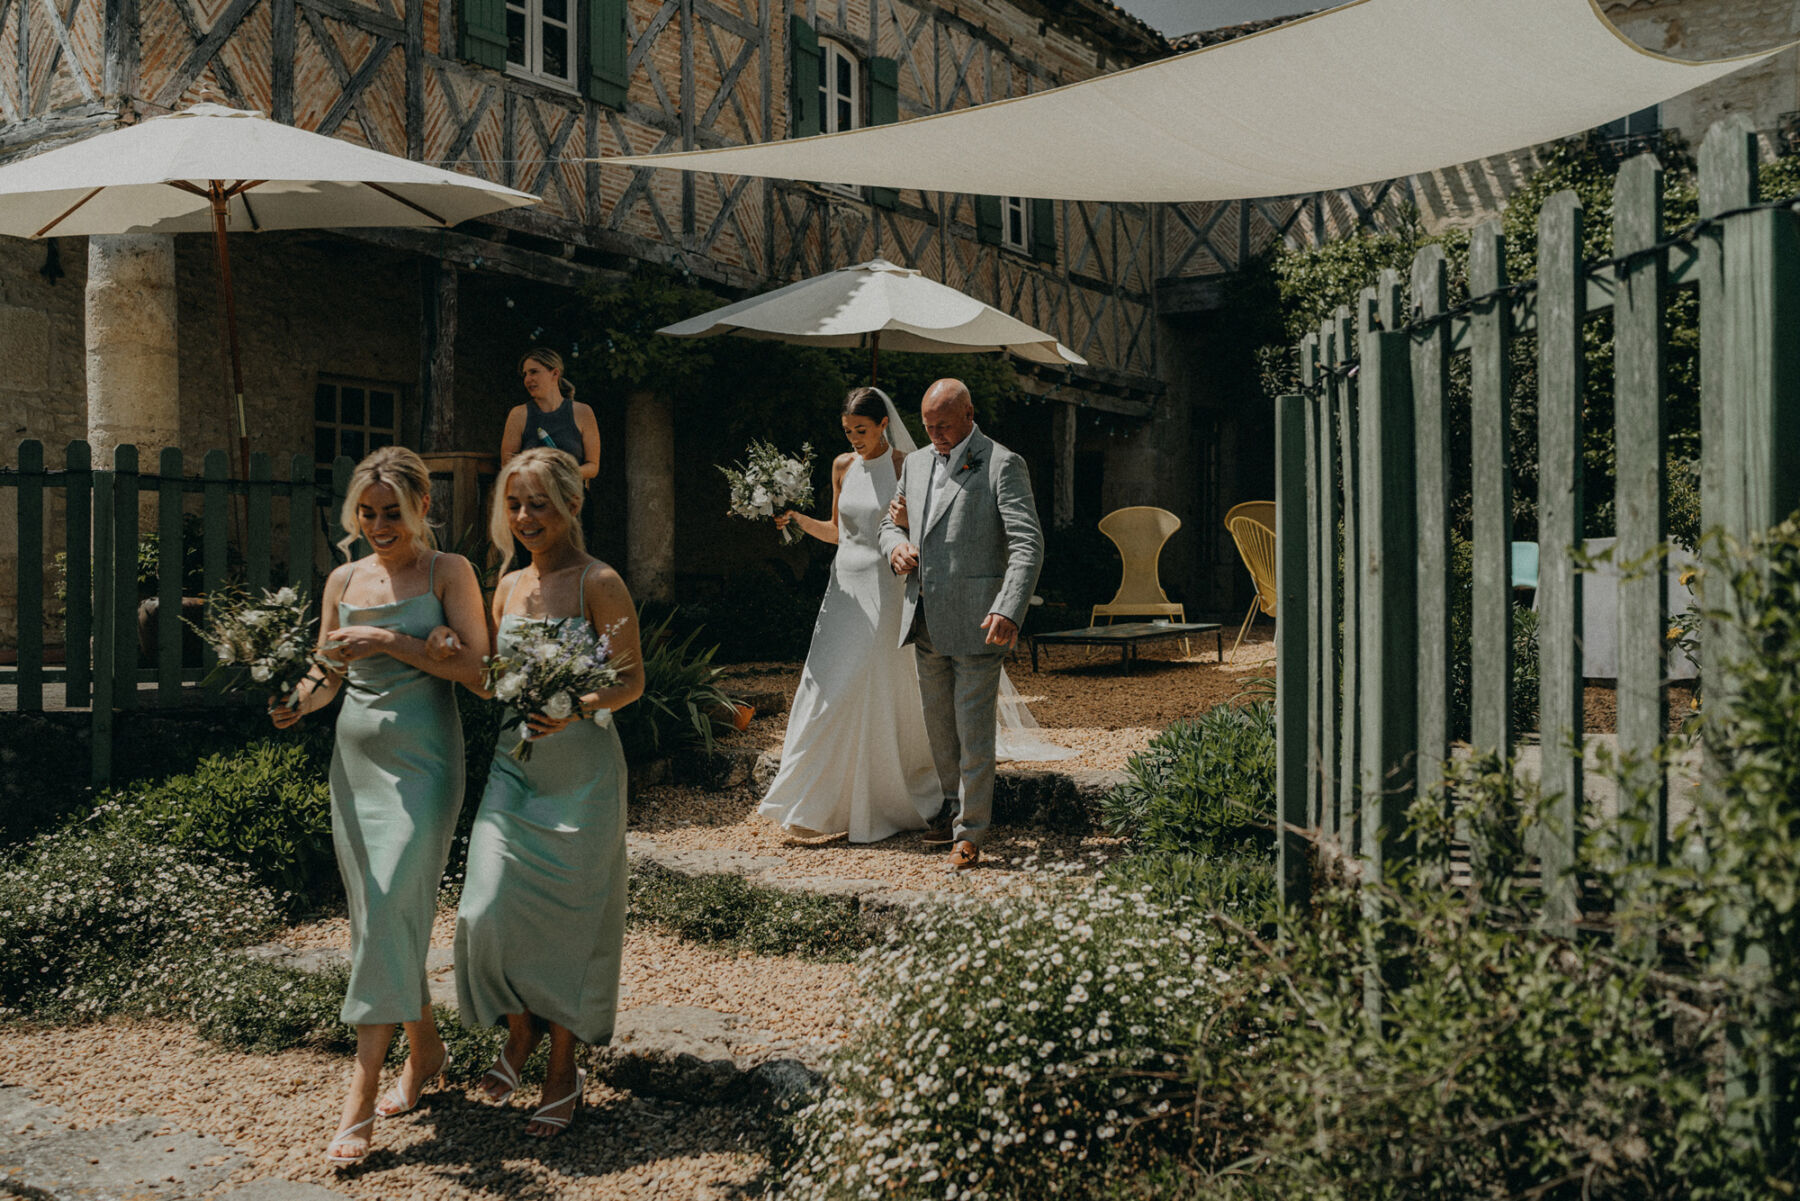 Bride in a halterneck wedding dress in arms wtih her father making her way to the wedding ceremony with her bridesmaids in pale green dresses.